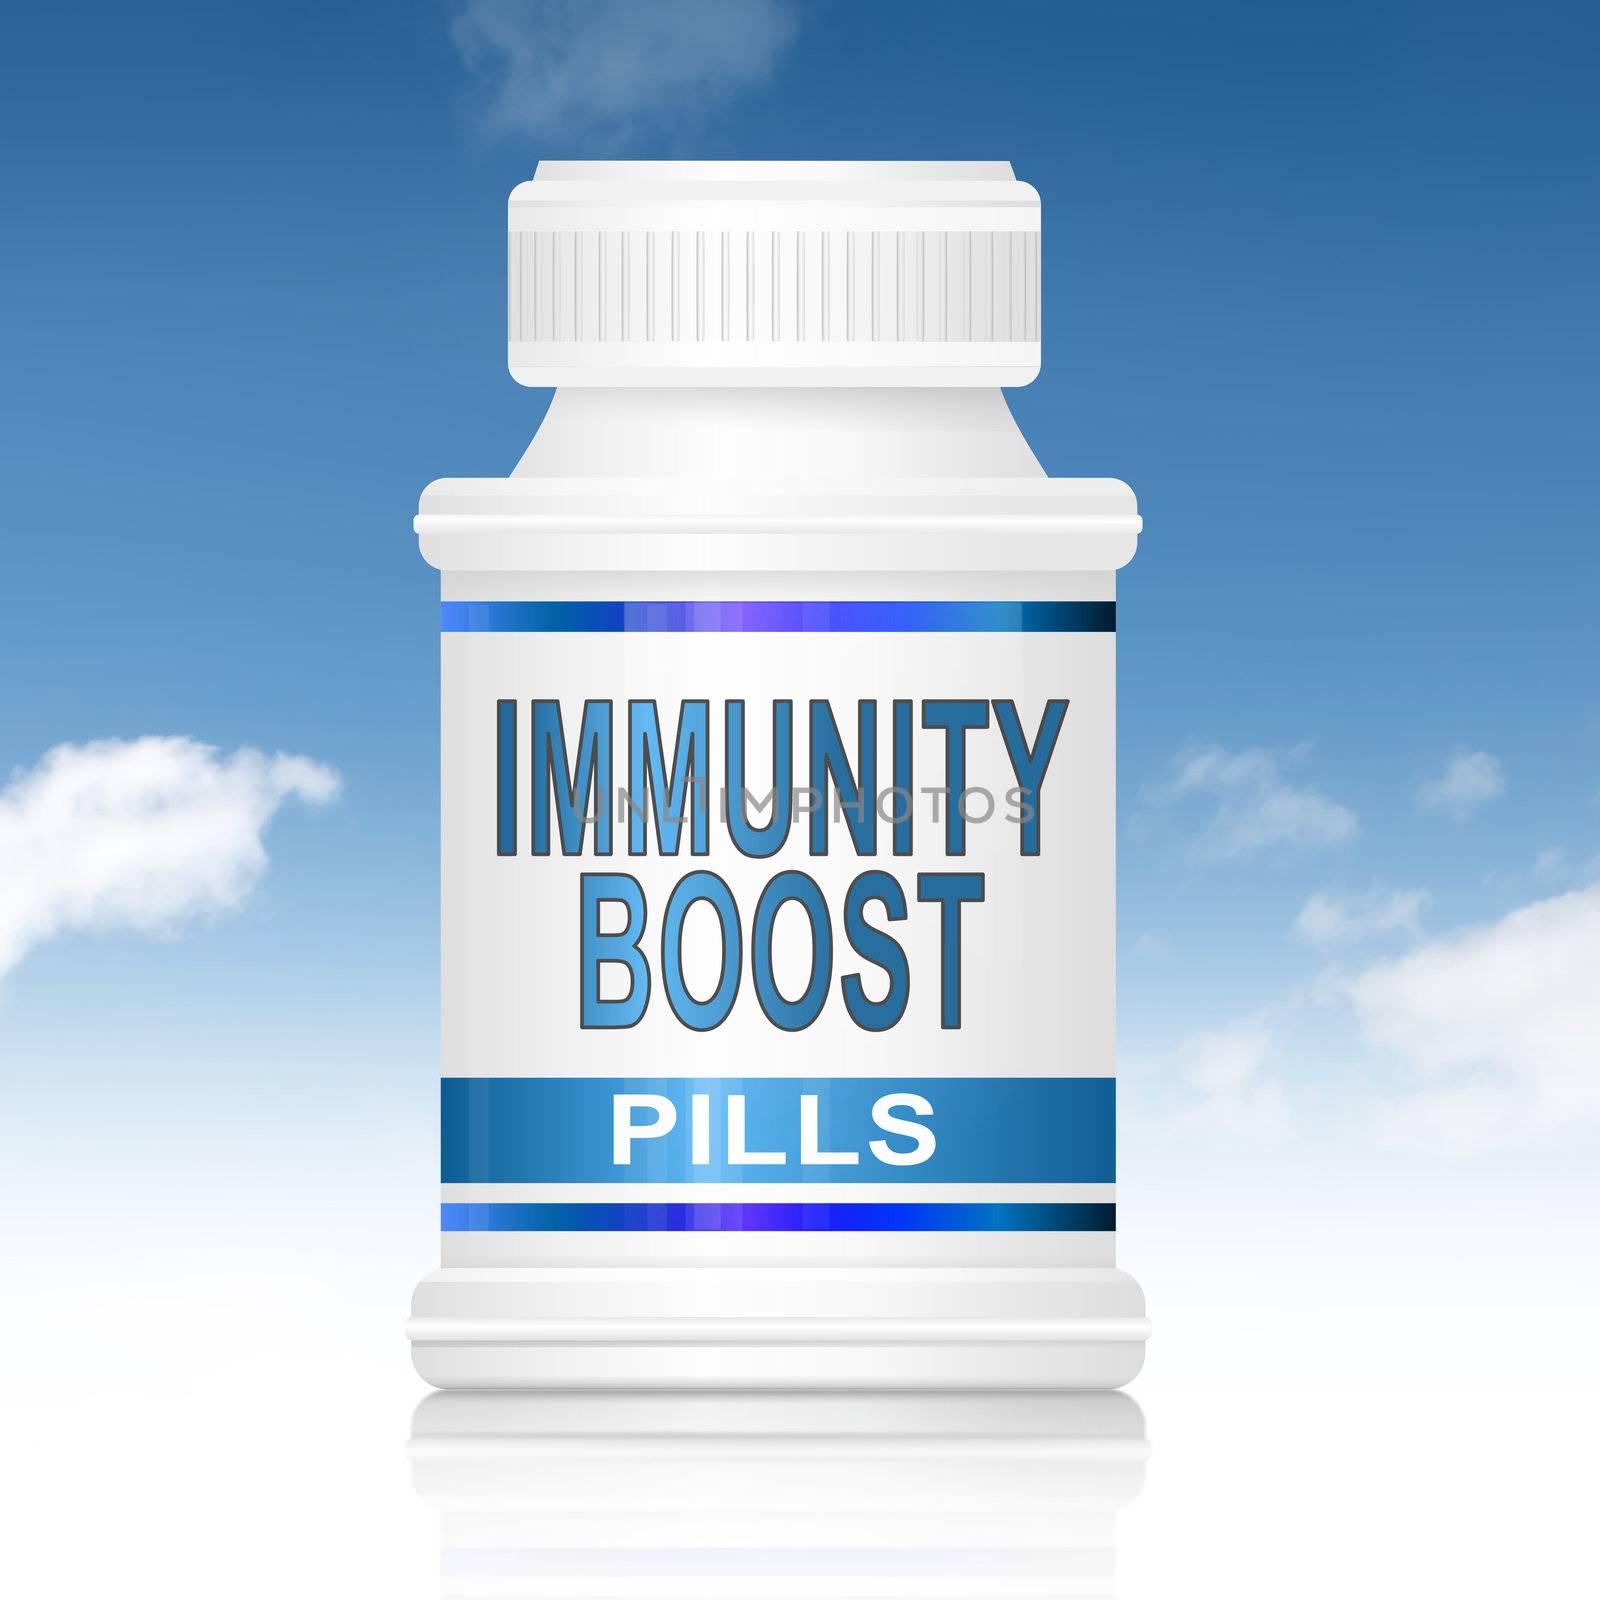 Illustration depicting a medication container with an immunity boost concept.